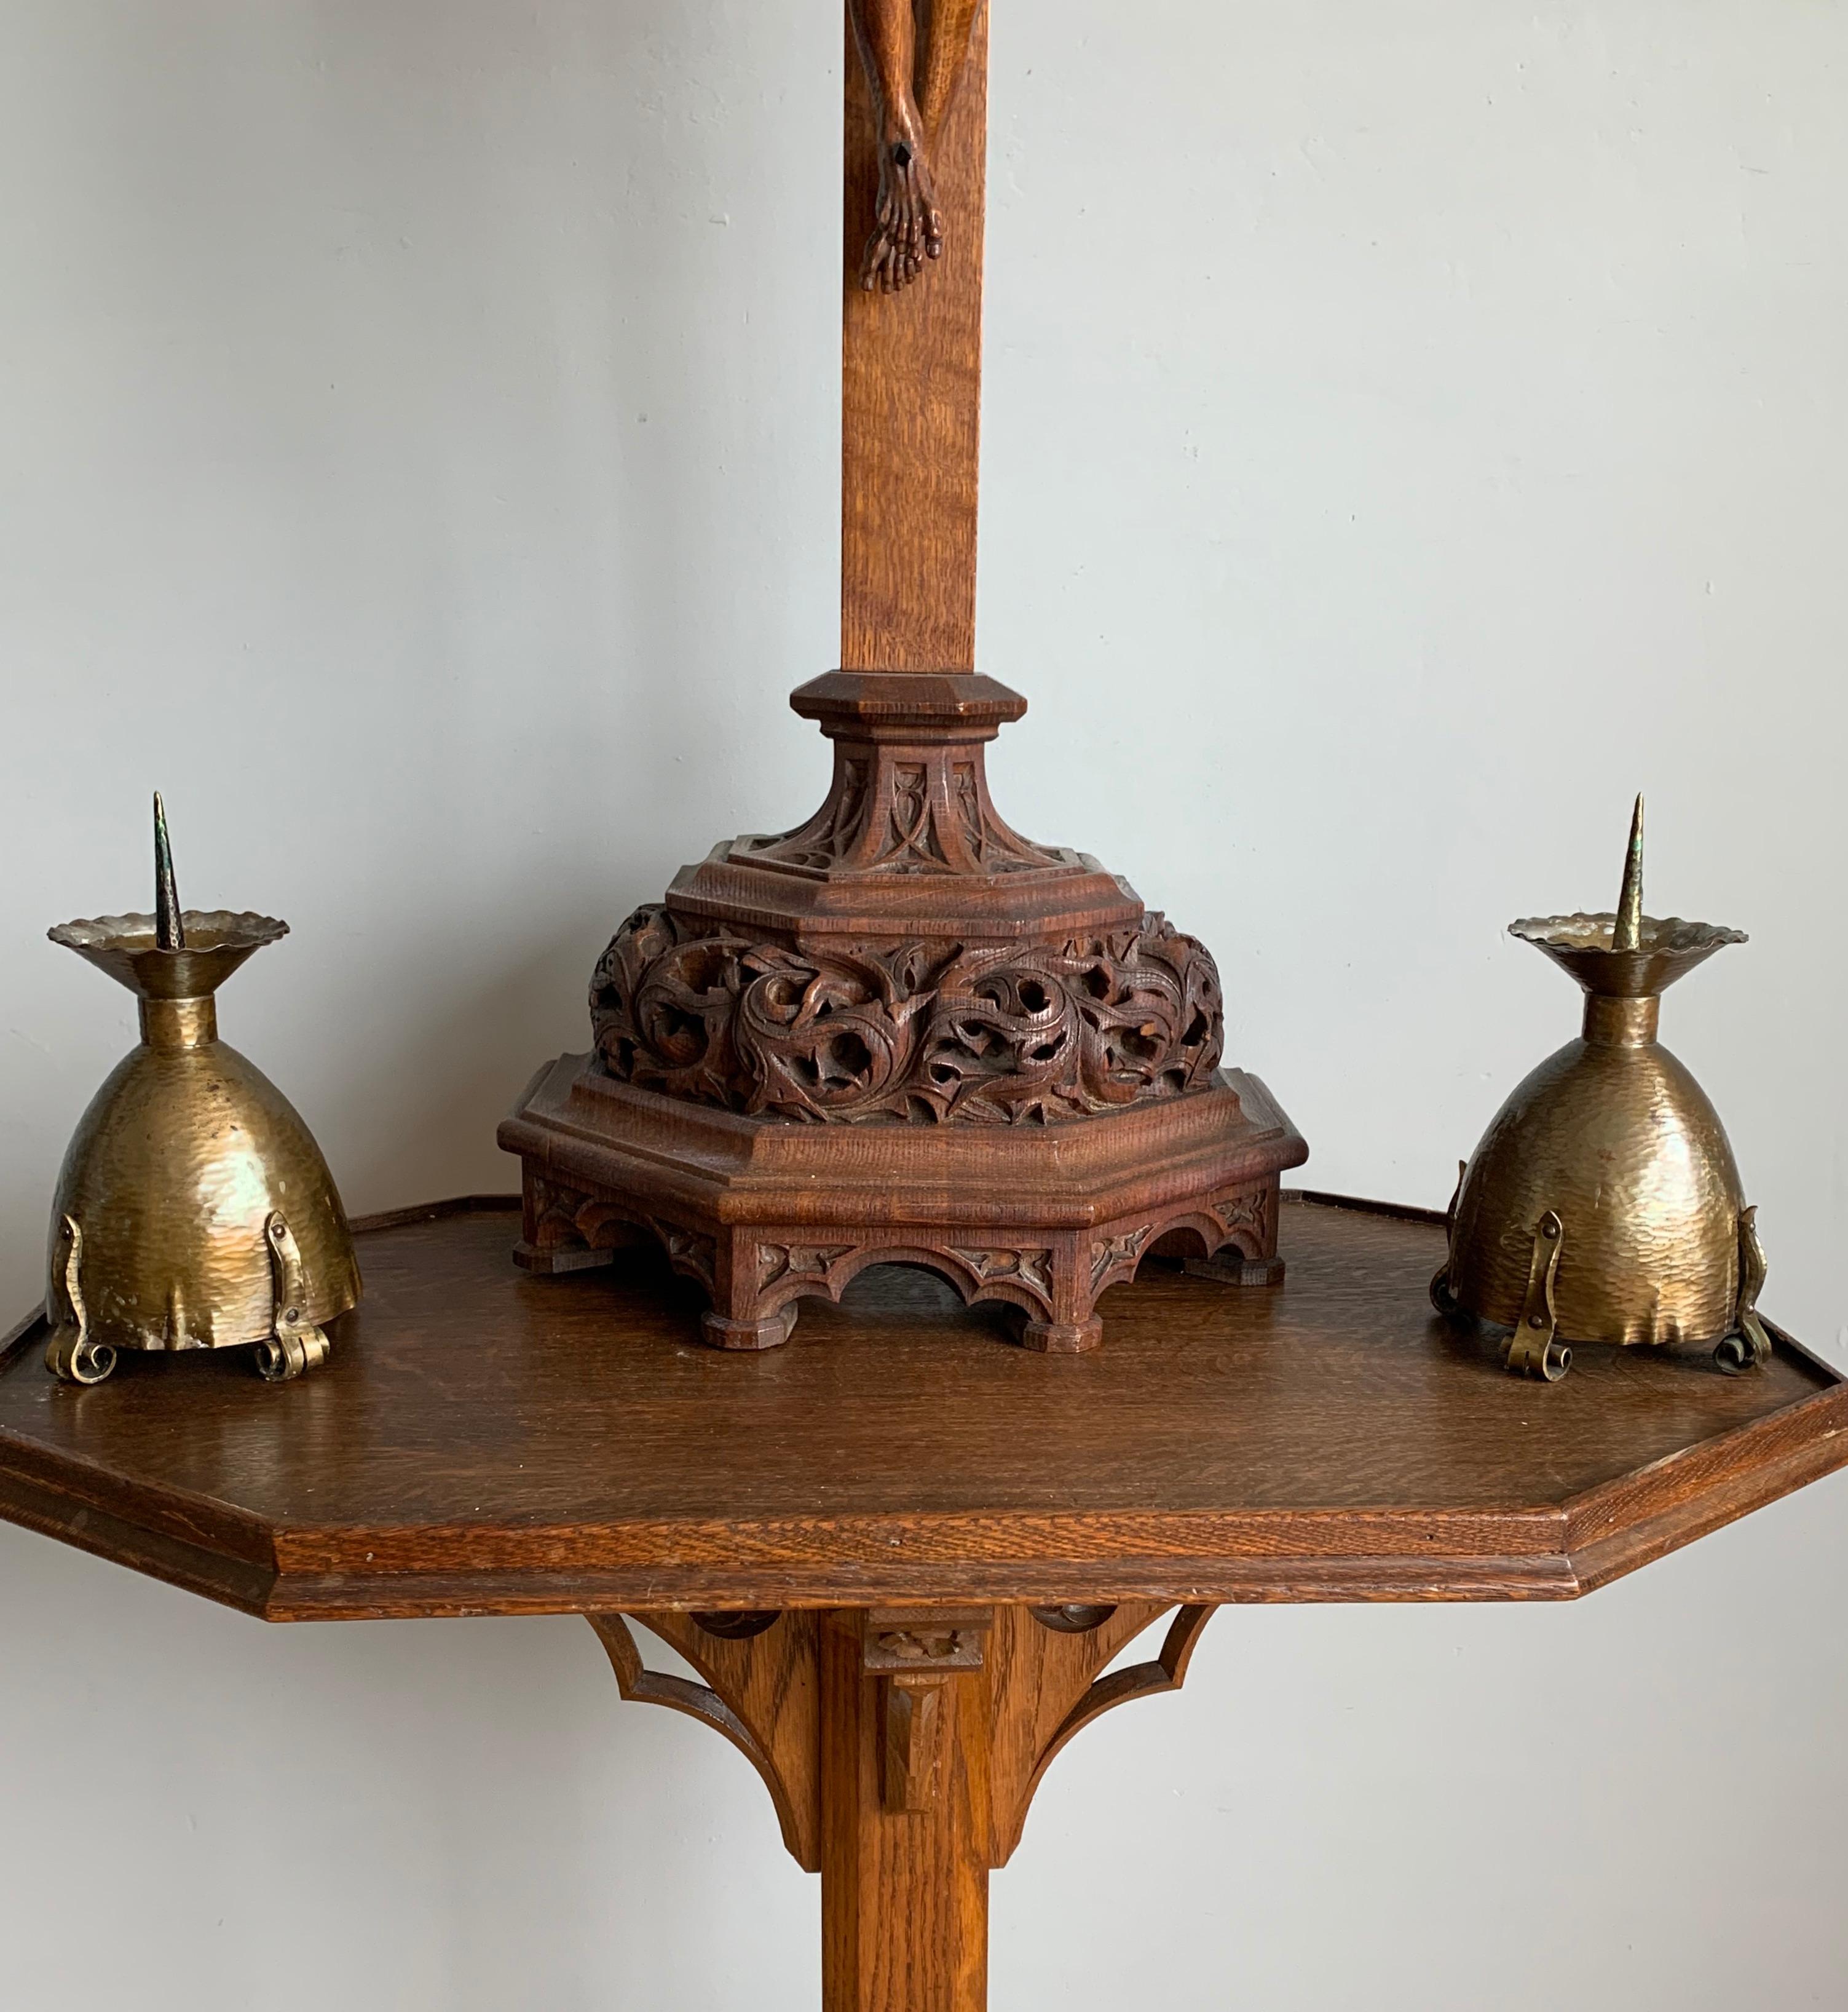 Gothic Revival Superbly Handcrafted Pair of Arts & Crafts Brass Candlesticks / Holders, 1910s For Sale